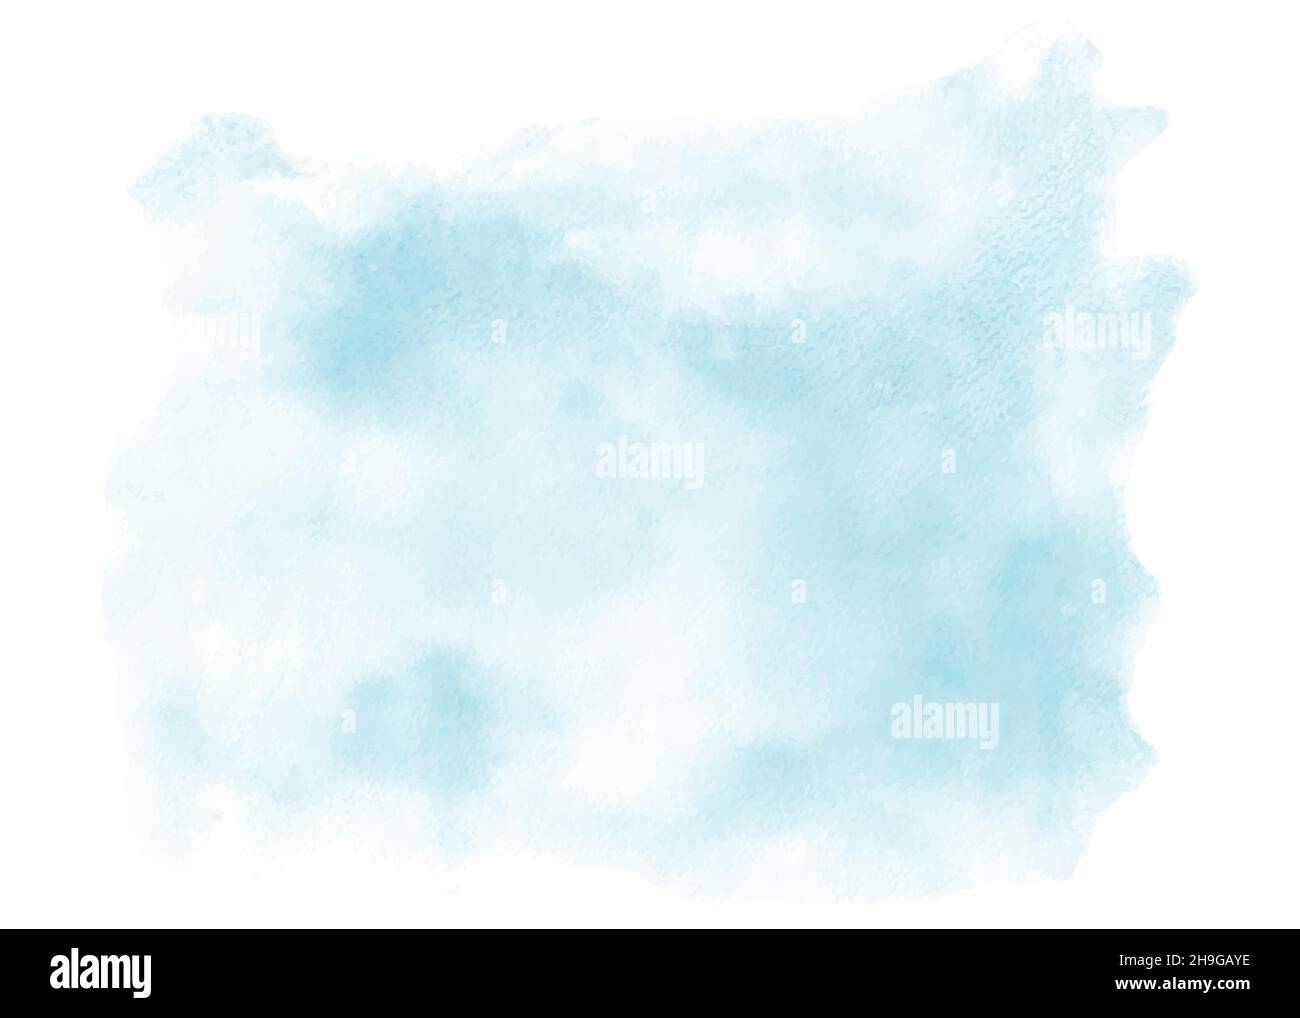 Abstract bright blue watercolor for background. Stains artistic vector used as being an element in the decorative background design of header, brochur Stock Vector